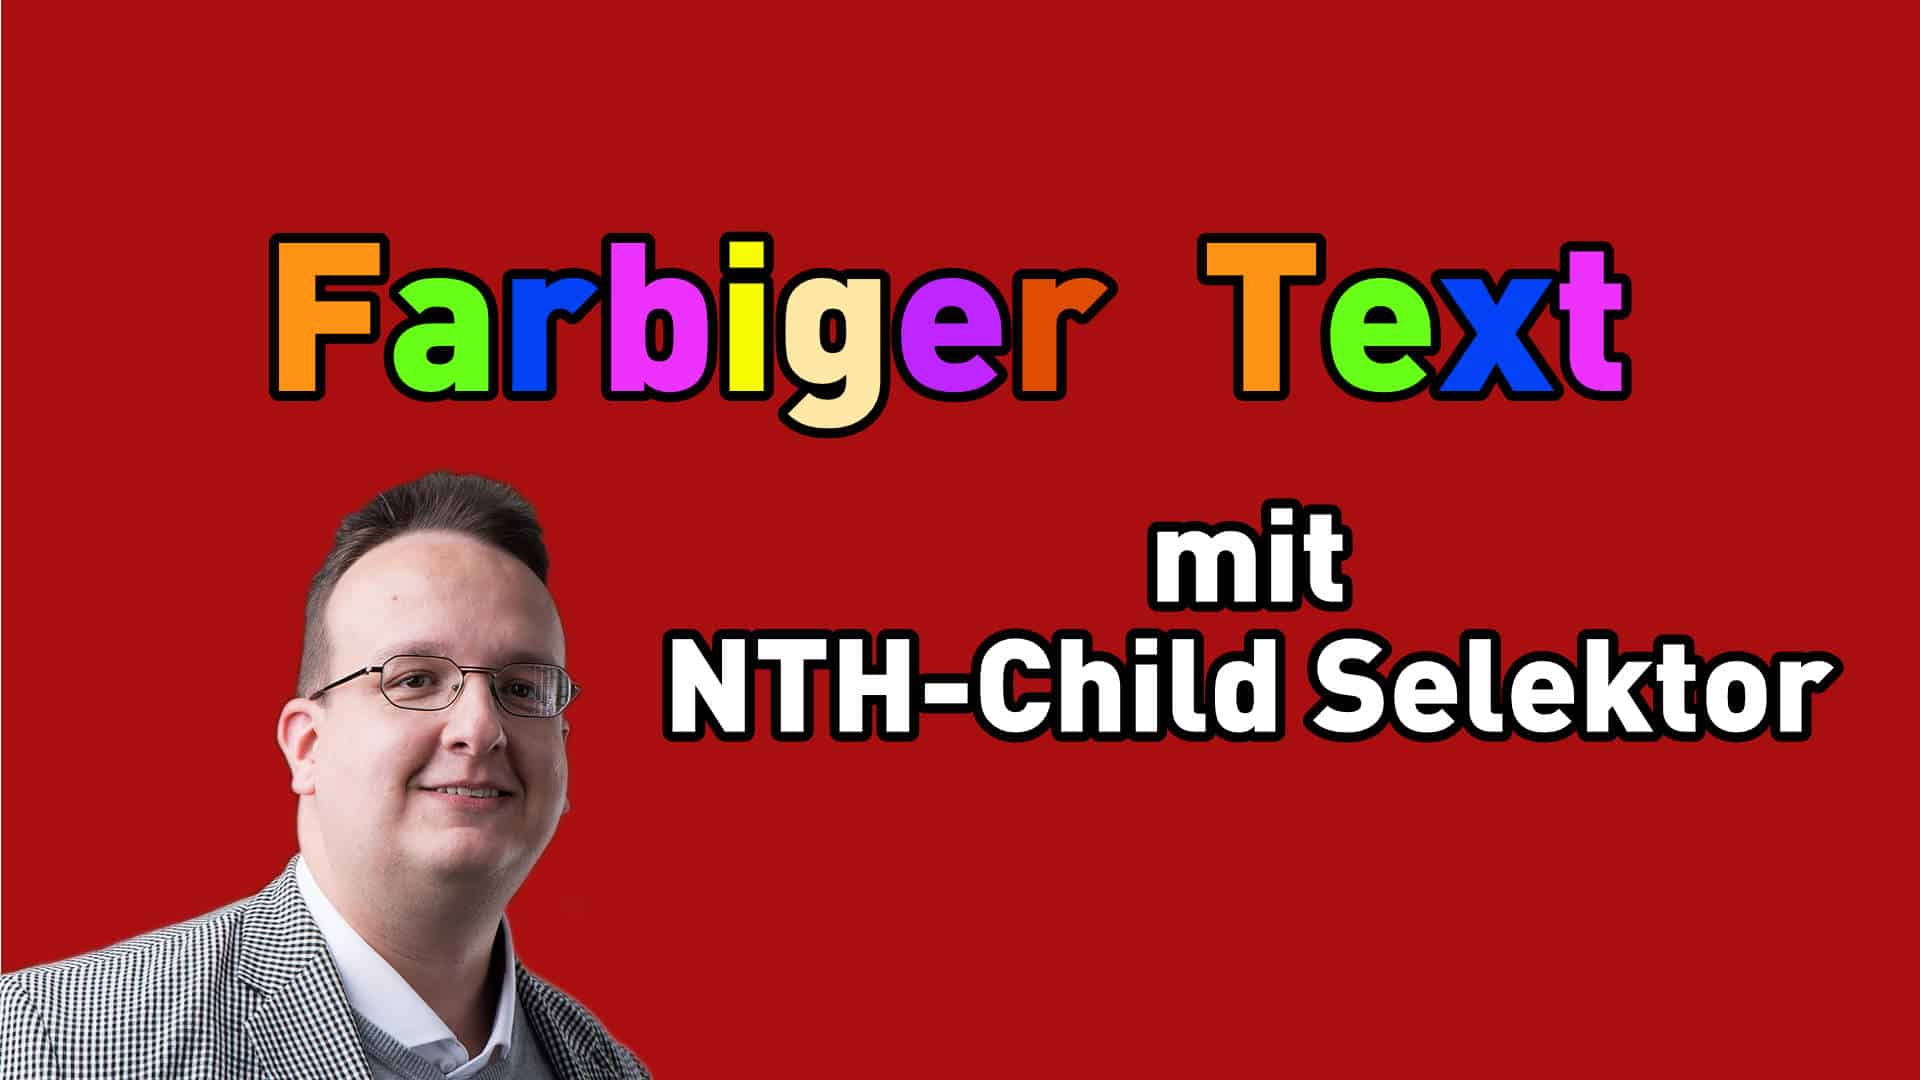 Farbiger Text mit NTH-Child Selektor (CSS Anleitung)